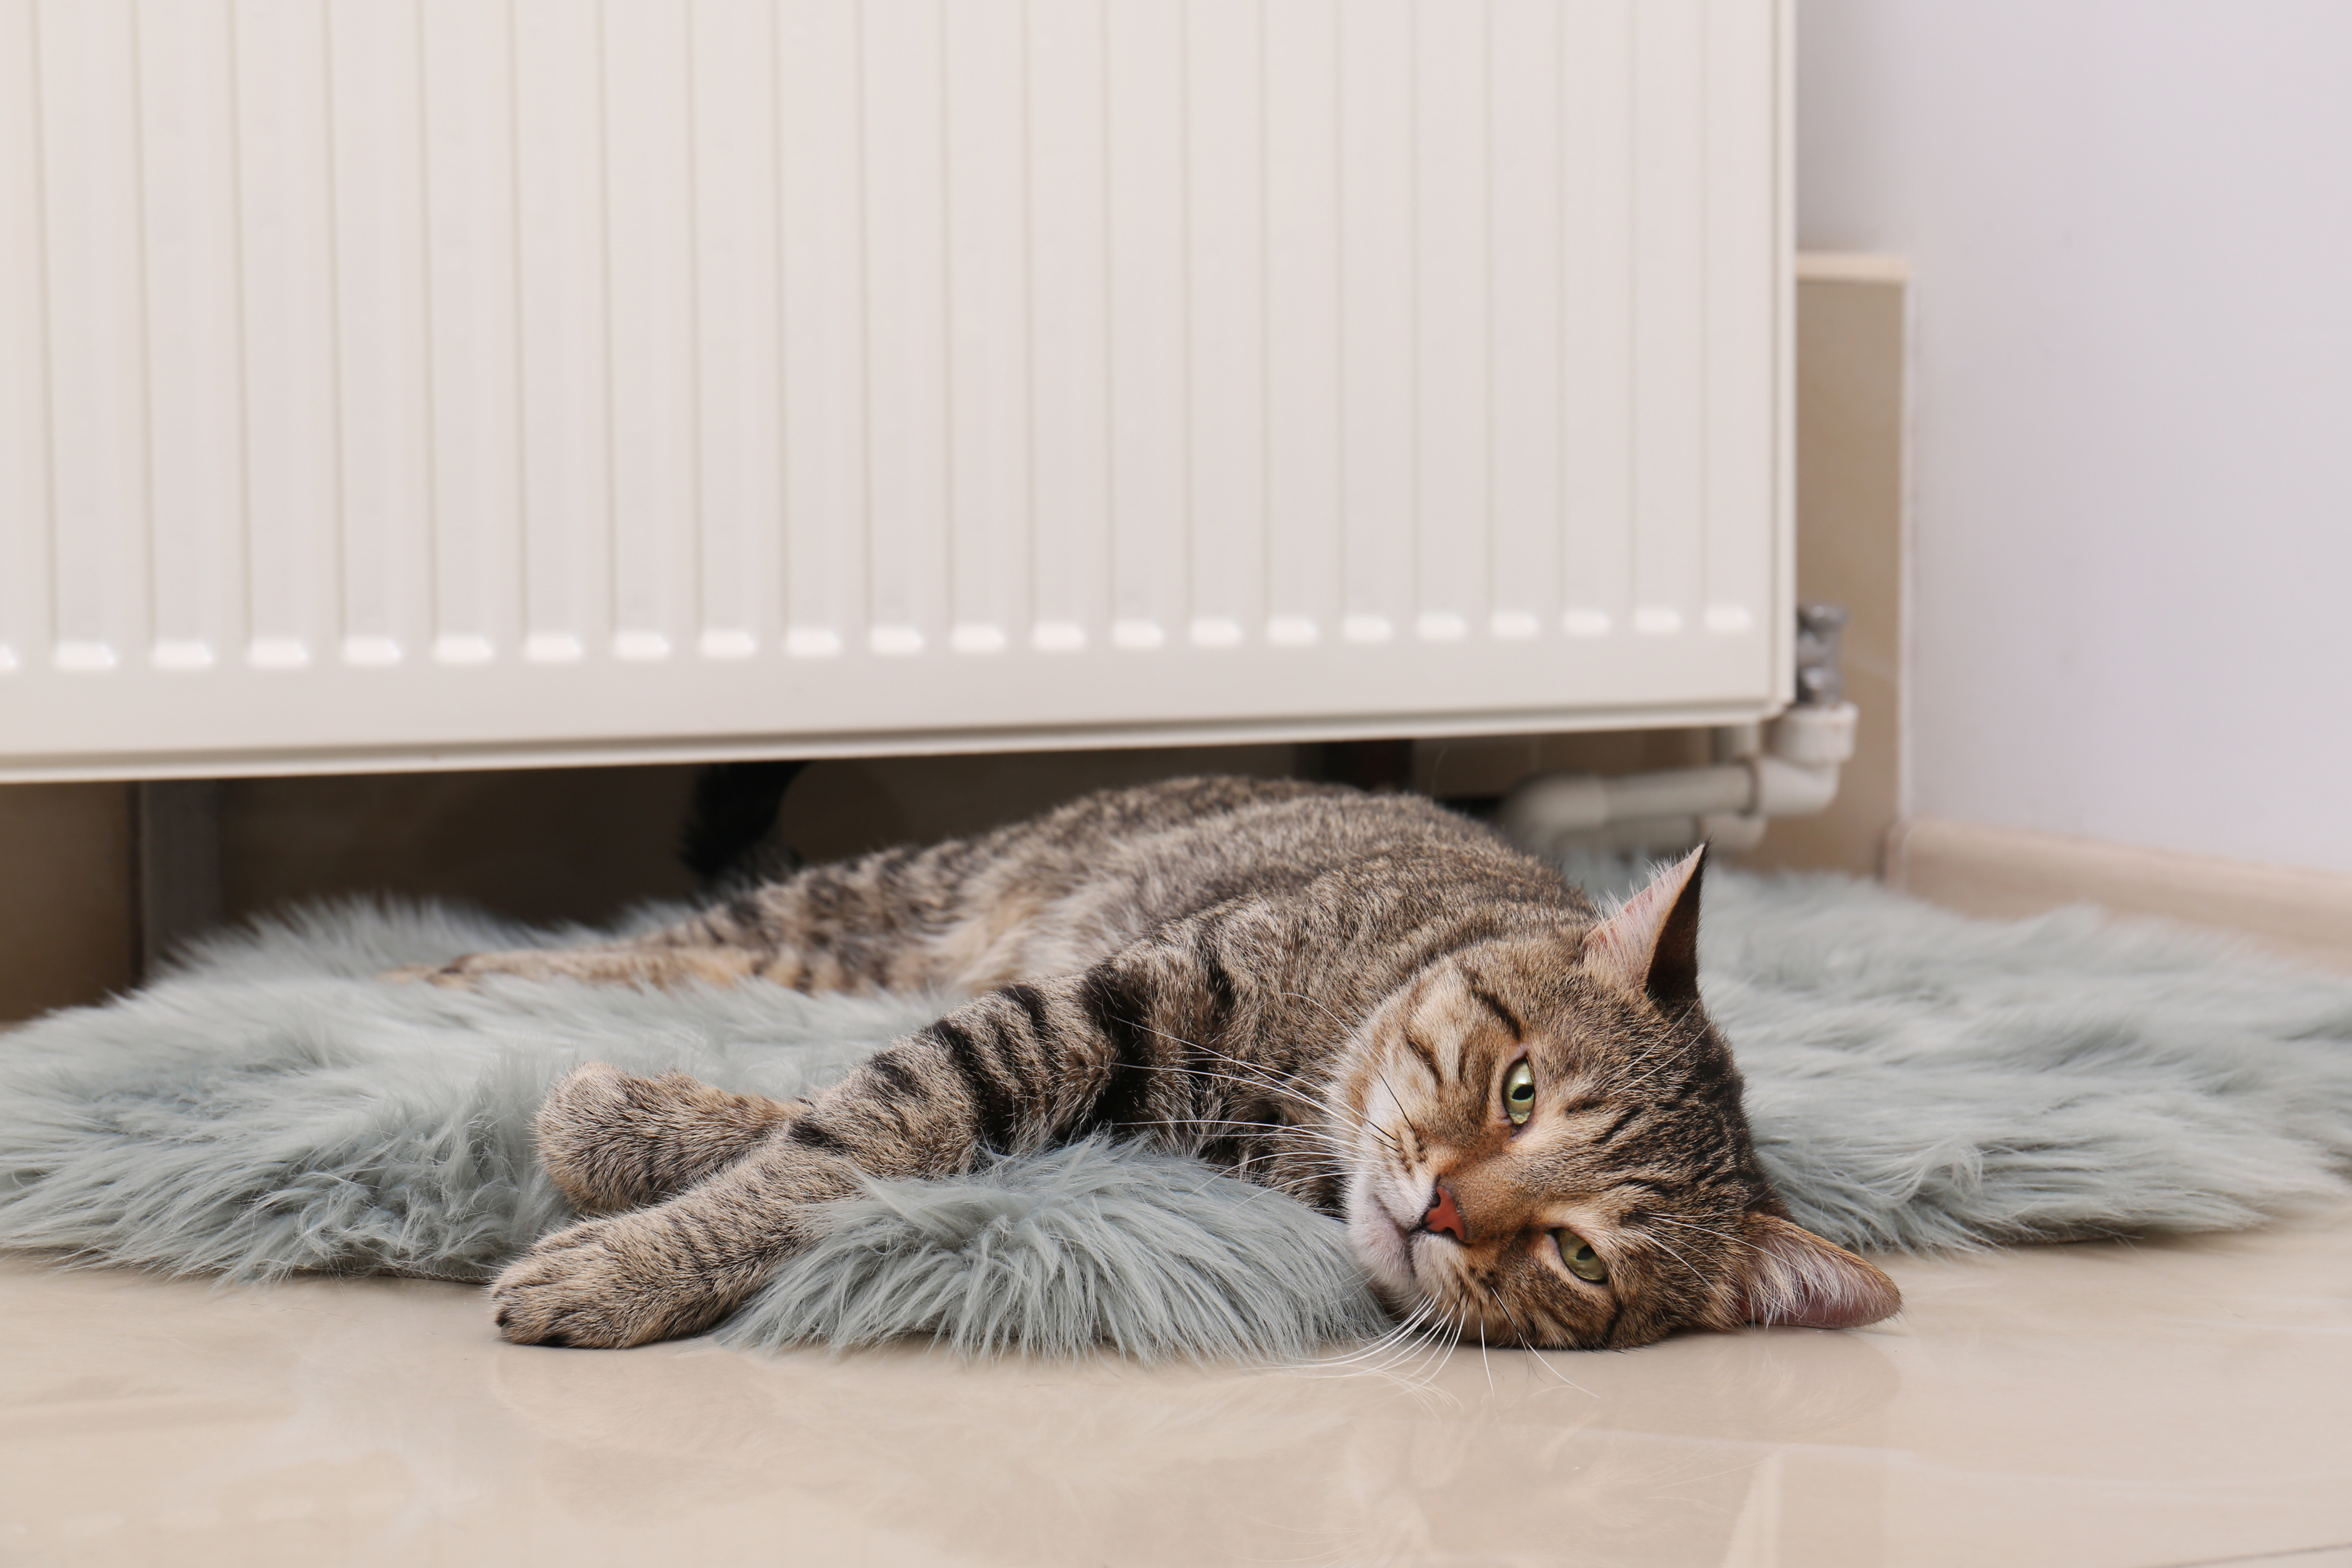 Cat laying on a faux fur rug | Source: Shutterstock